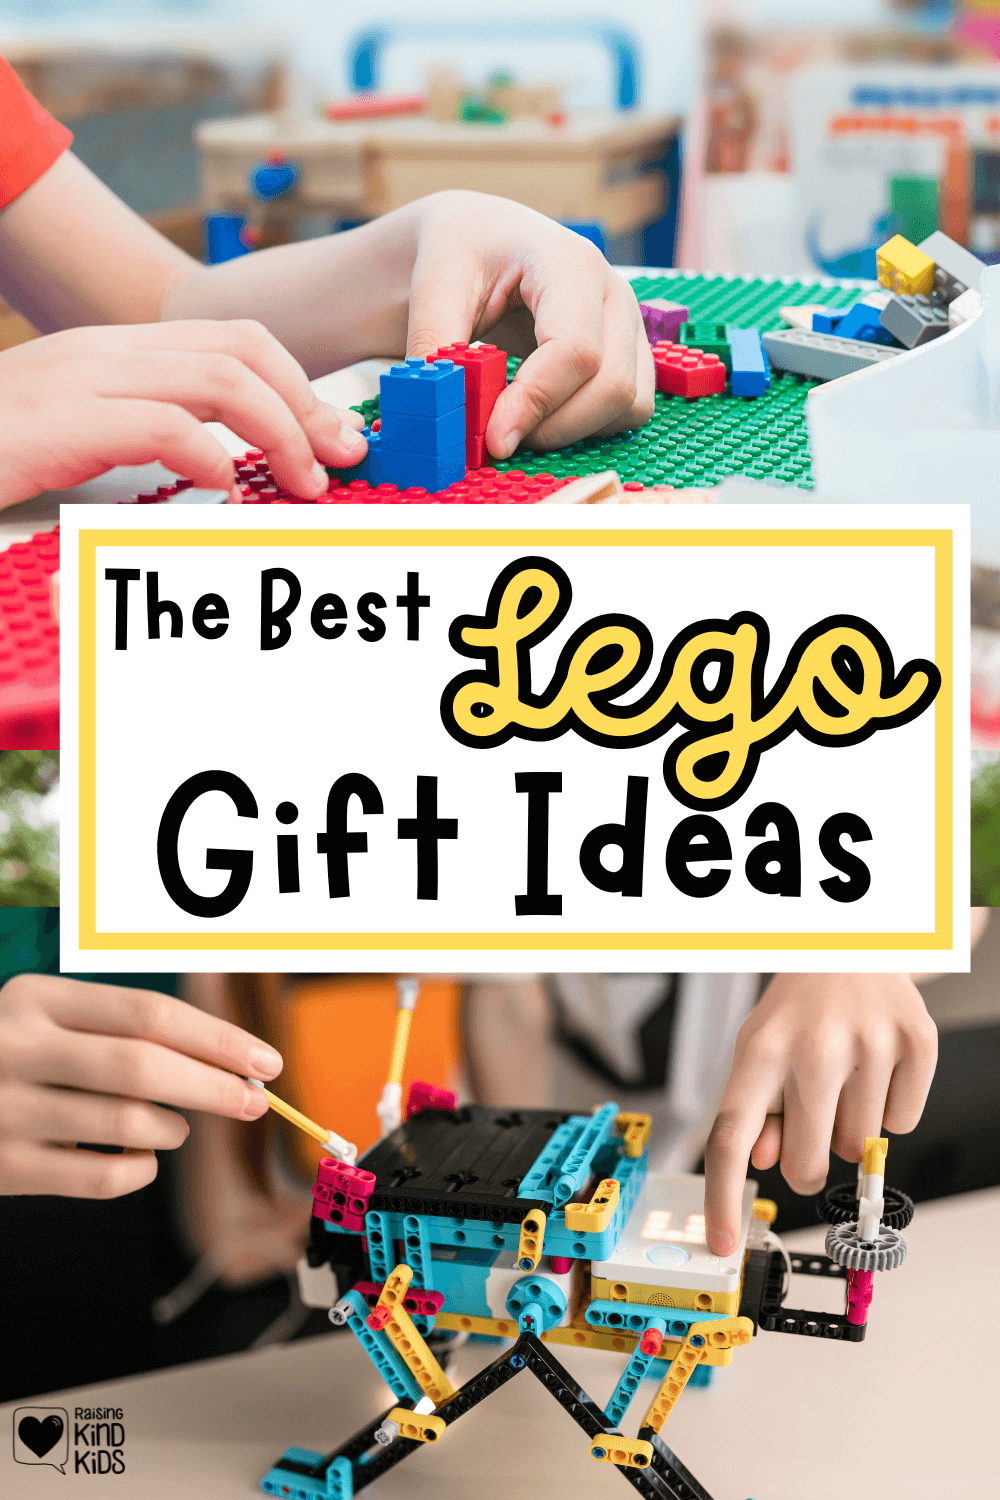 Have an ultimate lego lover in your life? This list of lego gifts is perfect for lego lovers #lego #legobuilders #legogifts #legoholidaygifts #legos #coffeeandcarpool #holidaygiftguides